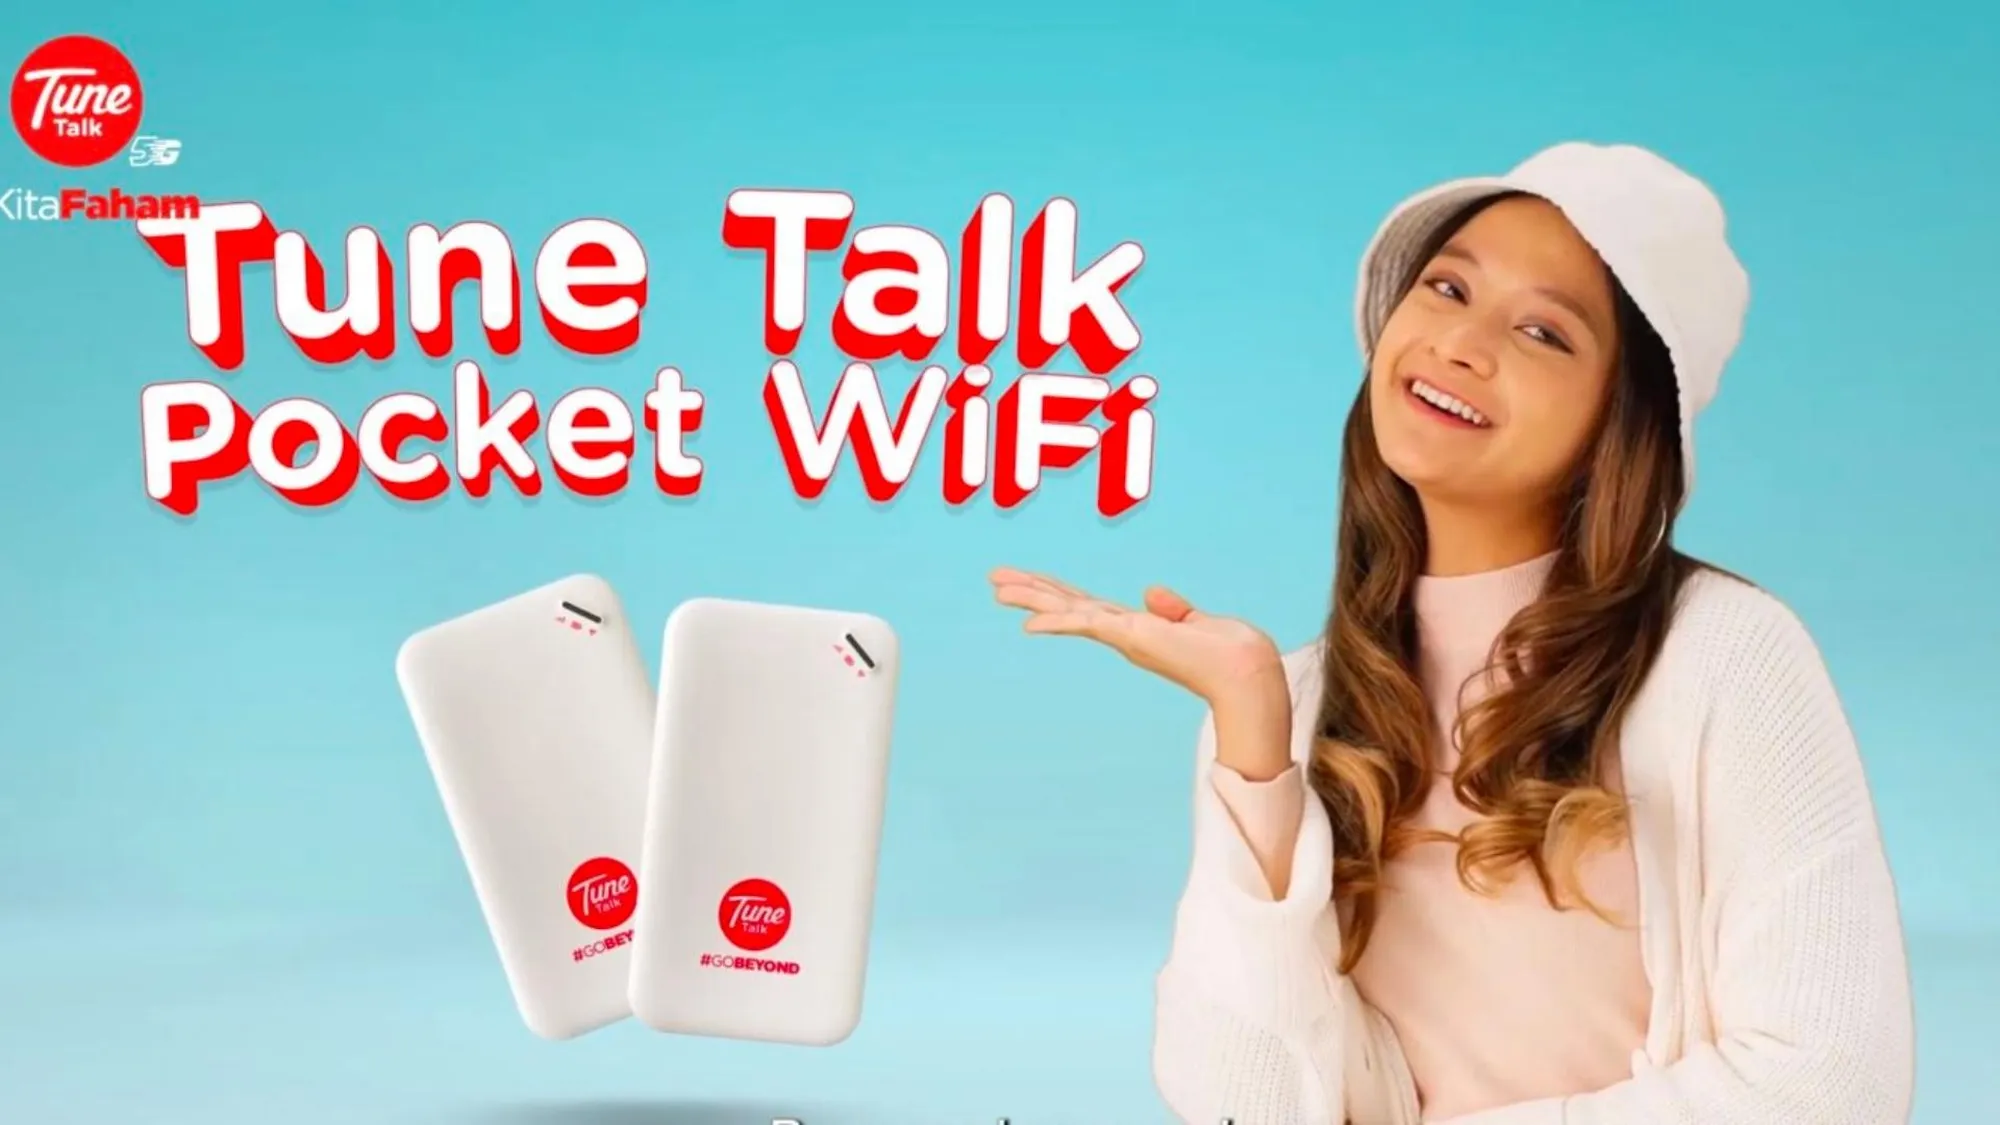 tune talk now rents out pocket wifi